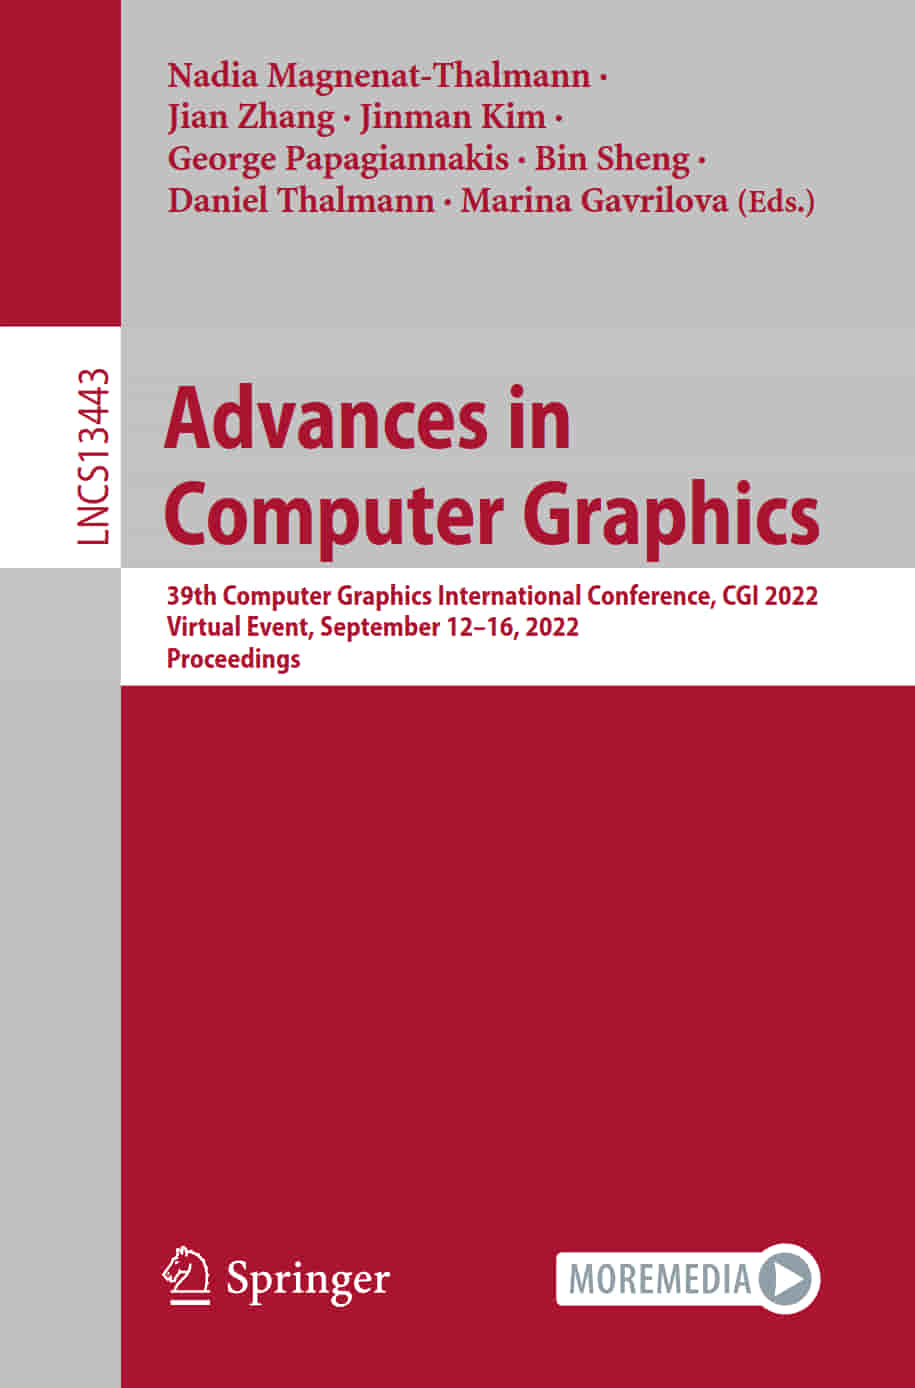 Advances in Computer Graphics 39th Computer Graphics International